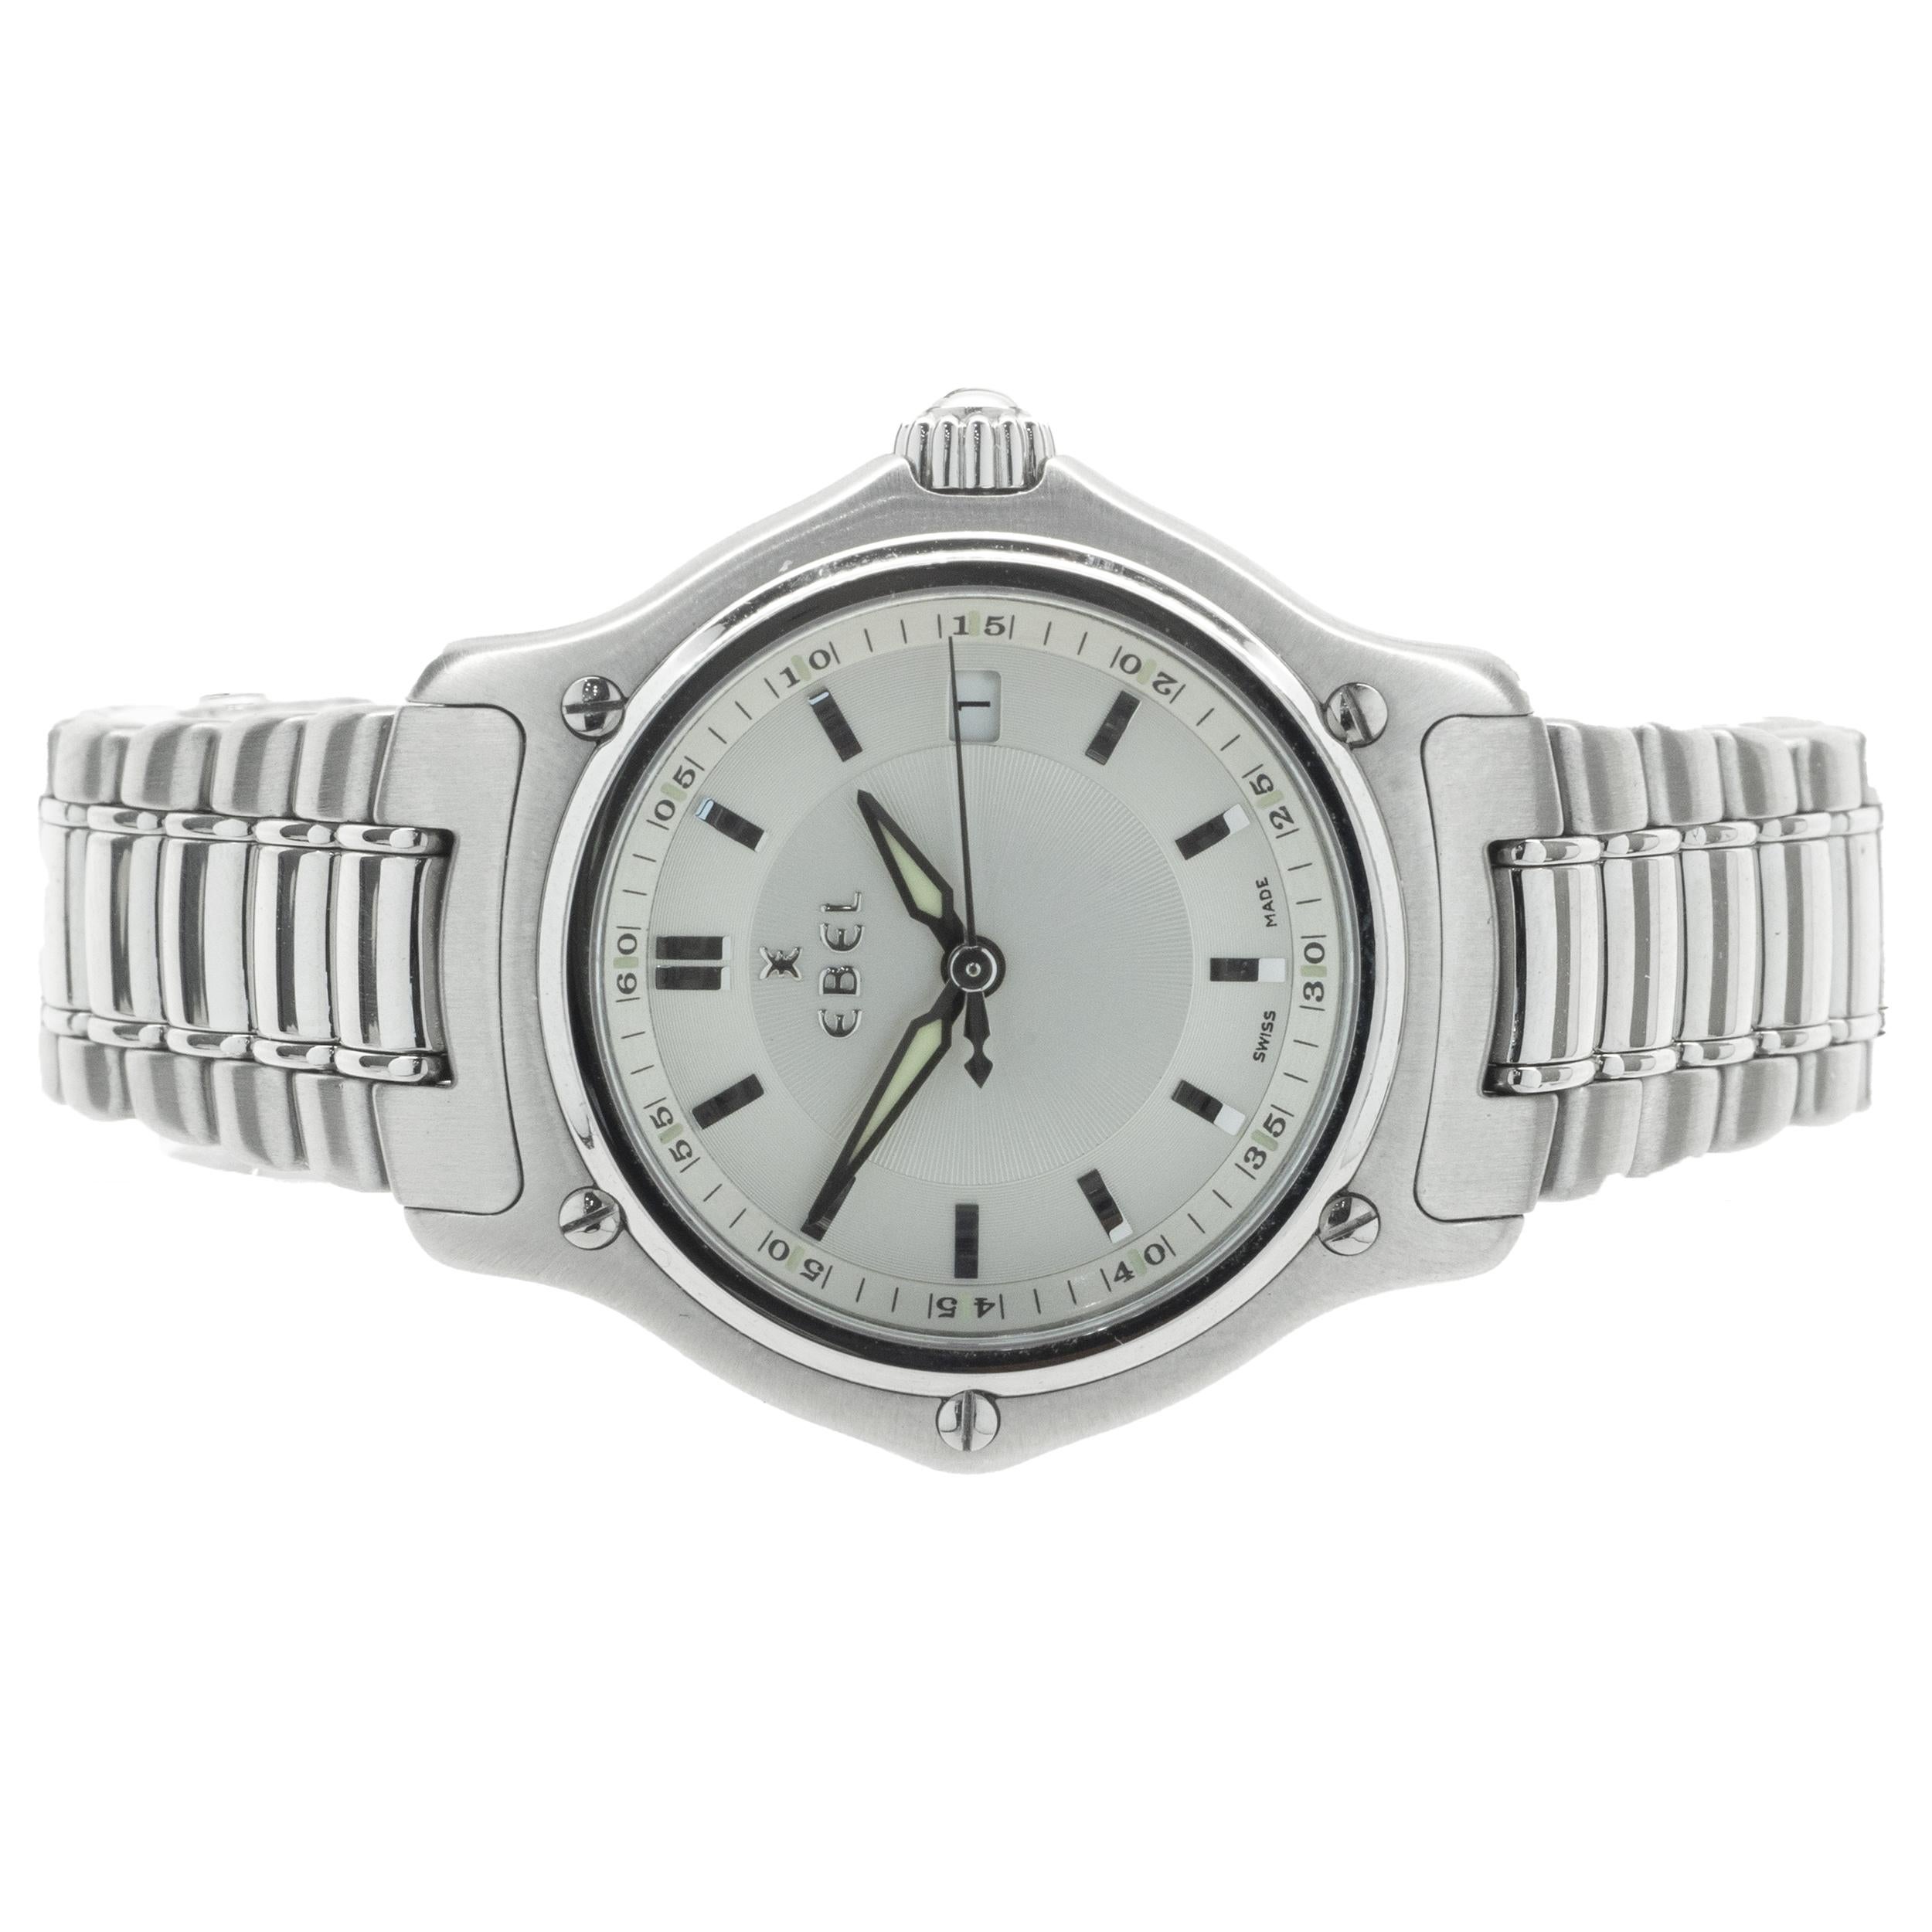 Movement: quartz
Function: hours, minutes, seconds, date
Case: 30mm stainless steel round case 
Band: Ebel stainless steel link bracelet
Dial: silver stick dial
Serial: 72507XXX

Complete with original box, no papers
Guaranteed to be authentic by